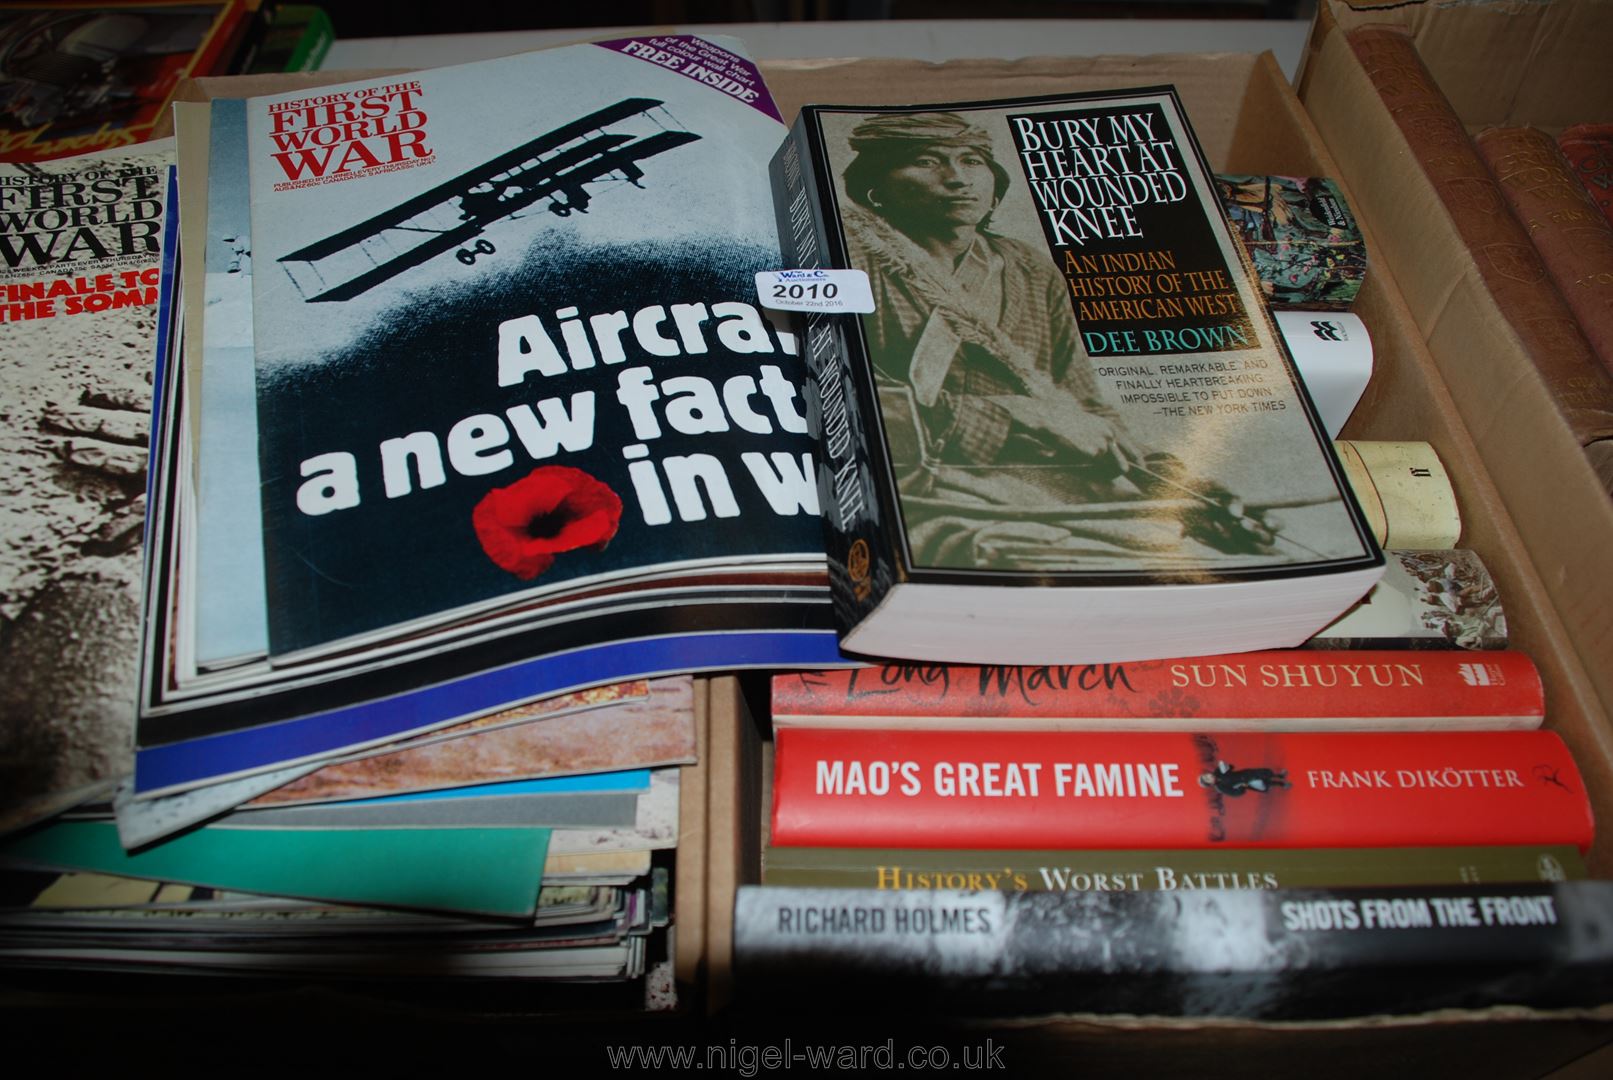 A box of Books on battles and another box on The History of the 1st World War.